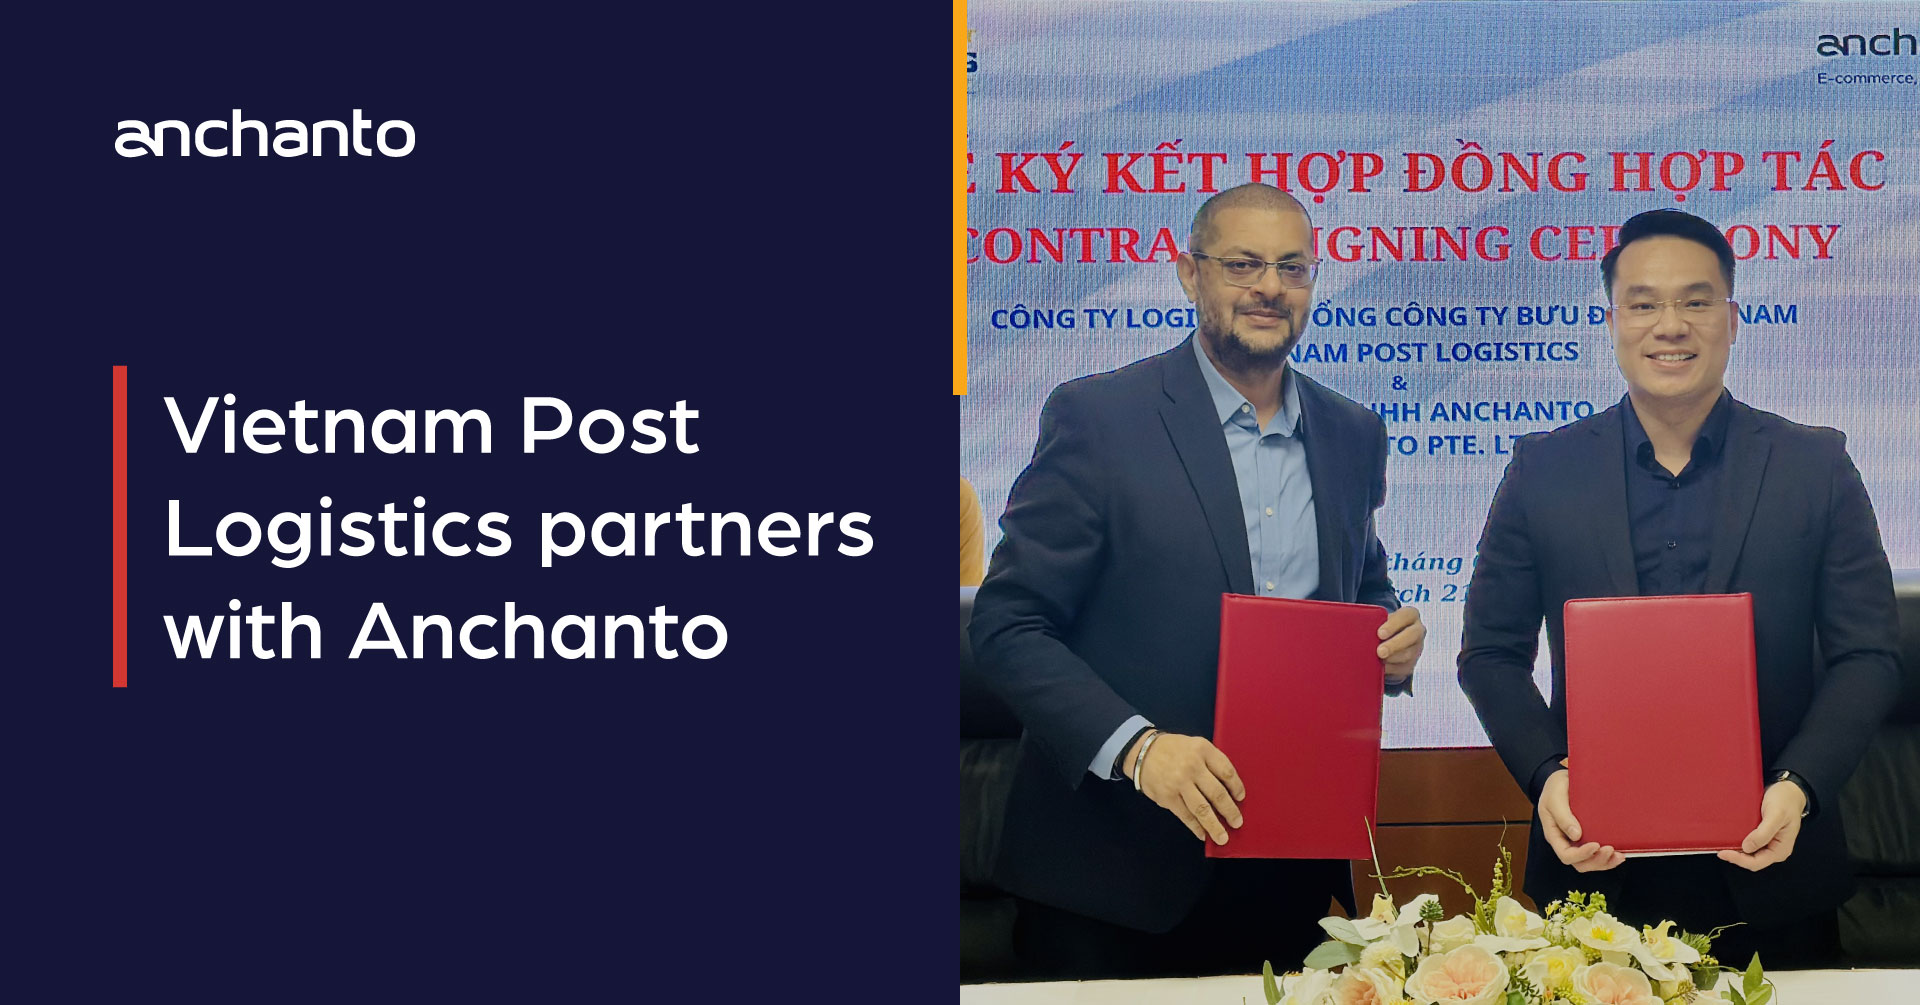 Anchanto and Vietnam Post Logistics Join Forces to Pioneer a New Era in Vietnam’s 3PL Fulfillment Industry